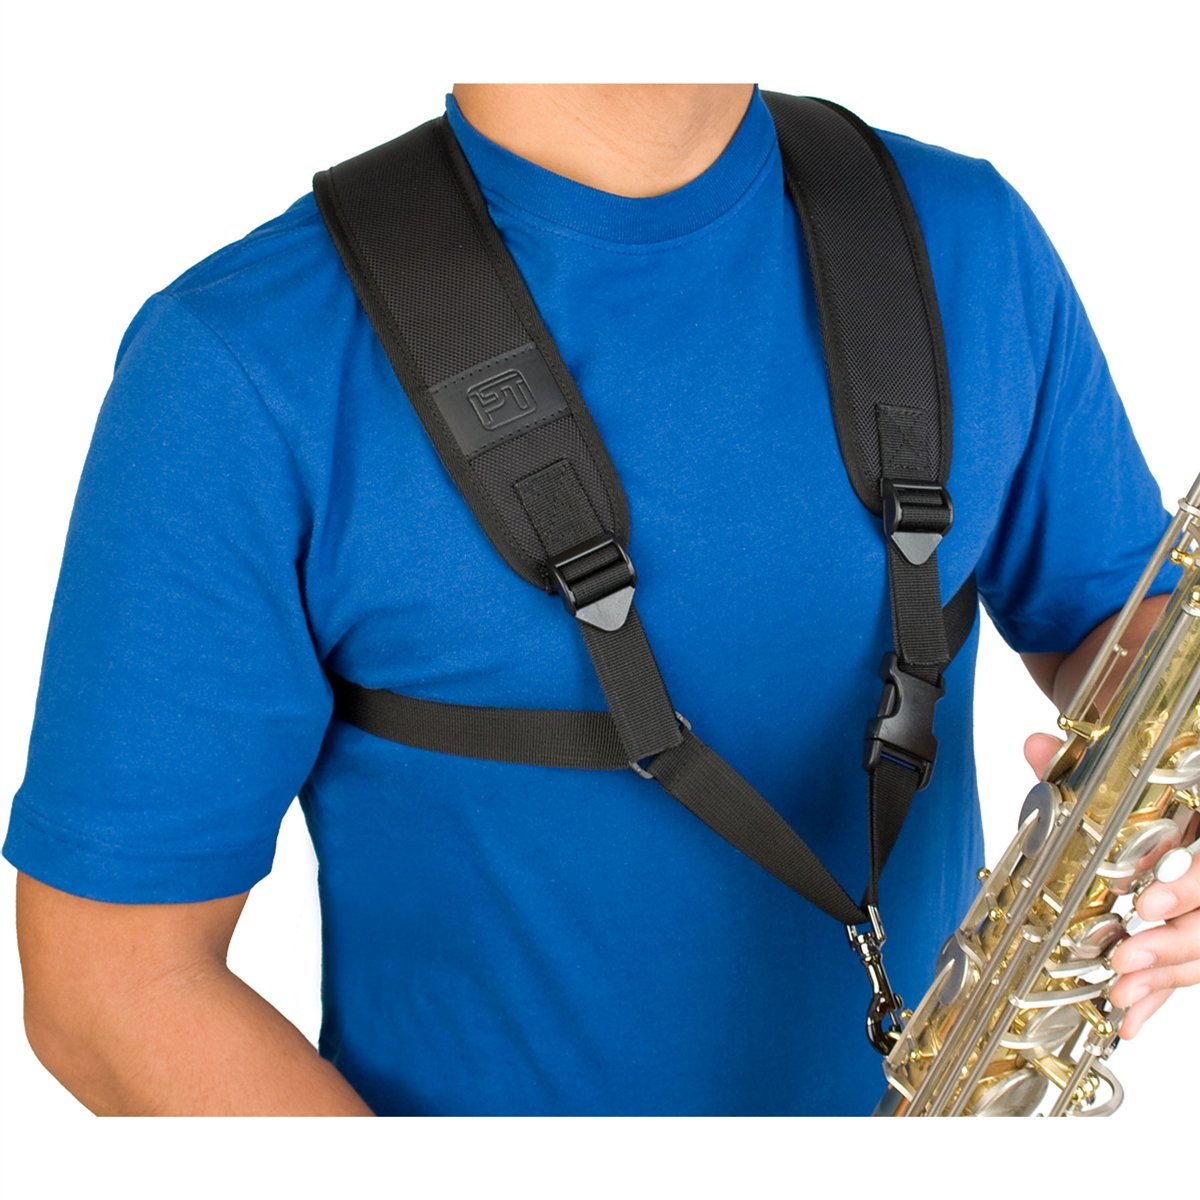 Protec - Saxophone Harness with Deluxe Metal Trigger Snap-Accessories-Protec-Music Elements